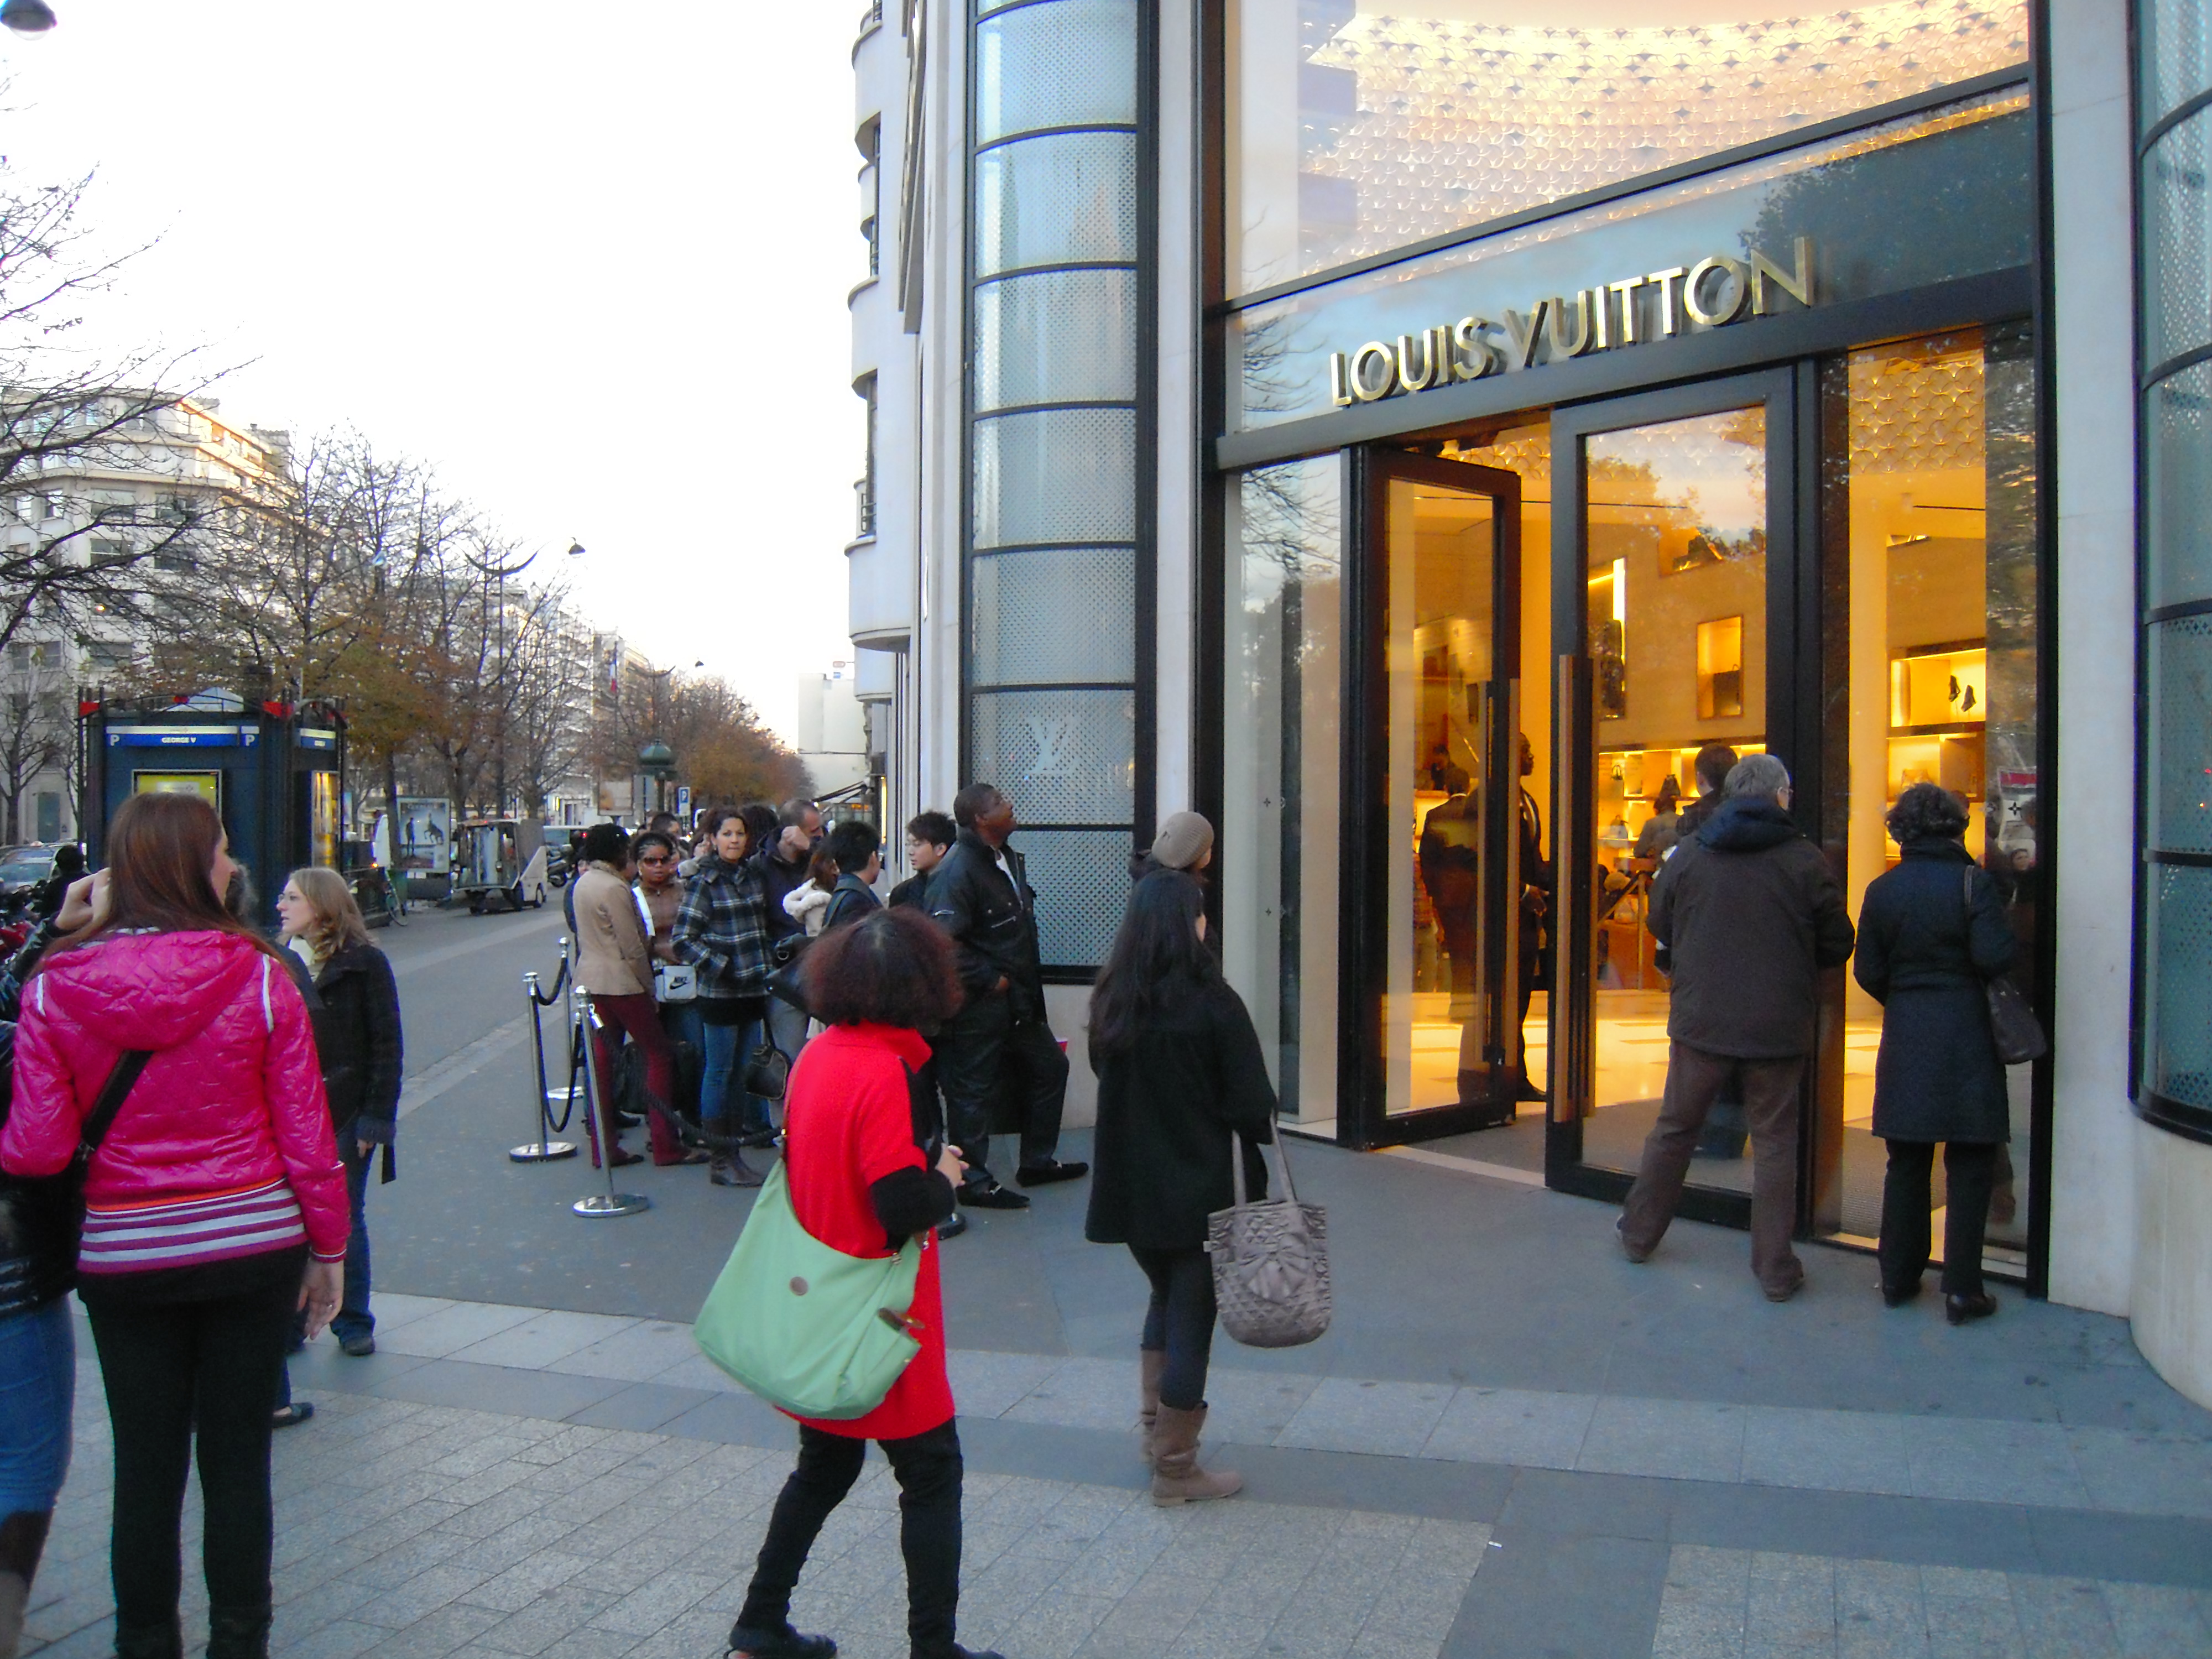 General view of the Louis Vuitton's Champs Elysees store, on